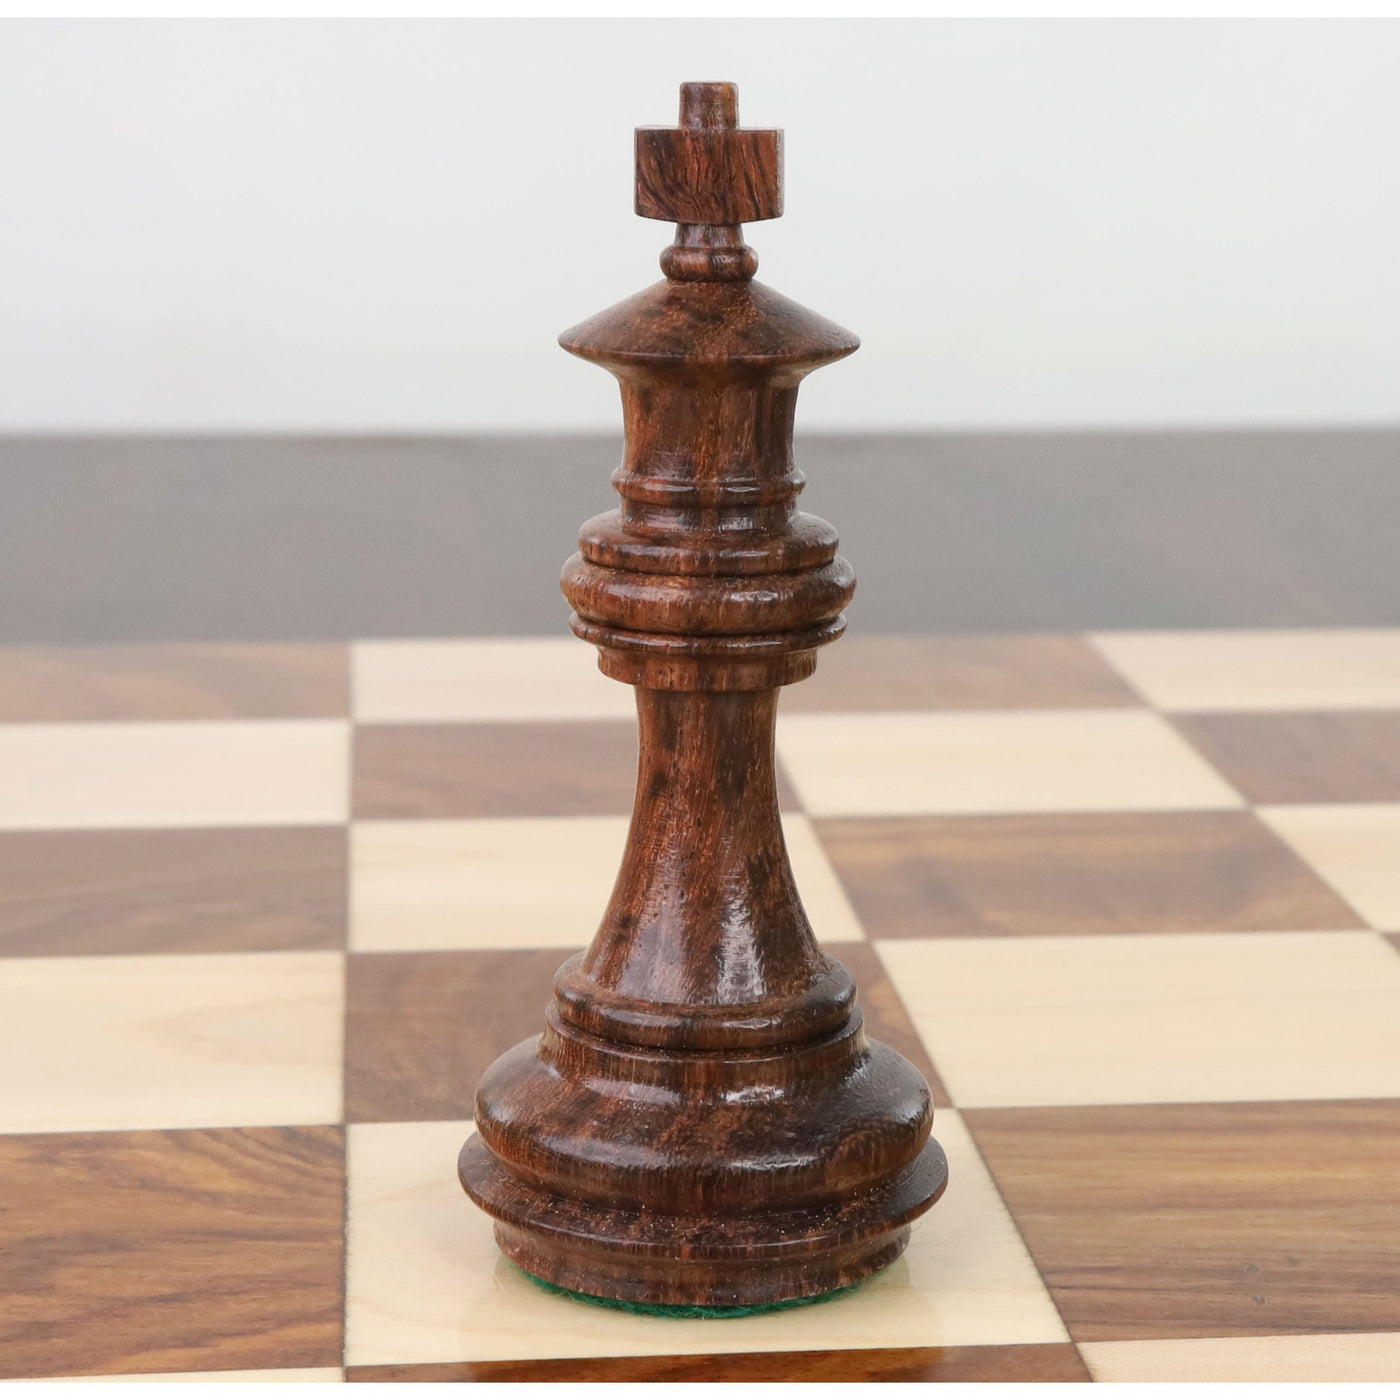 3.4" Meghdoot Series Staunton Chess Set - Chess Pieces Only - Weighted Golden Rosewood